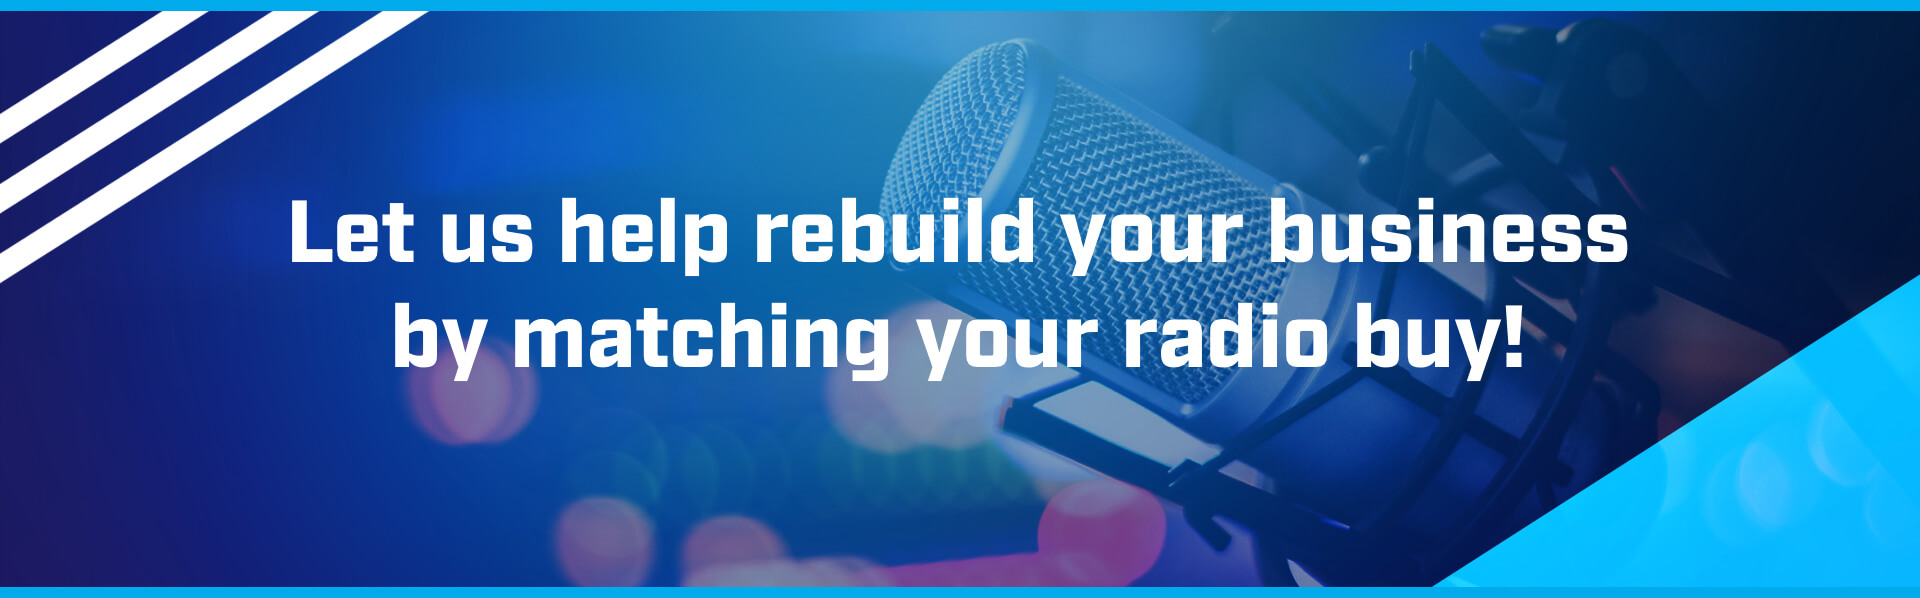 Let us help rebuild your business by matching your radio buy!